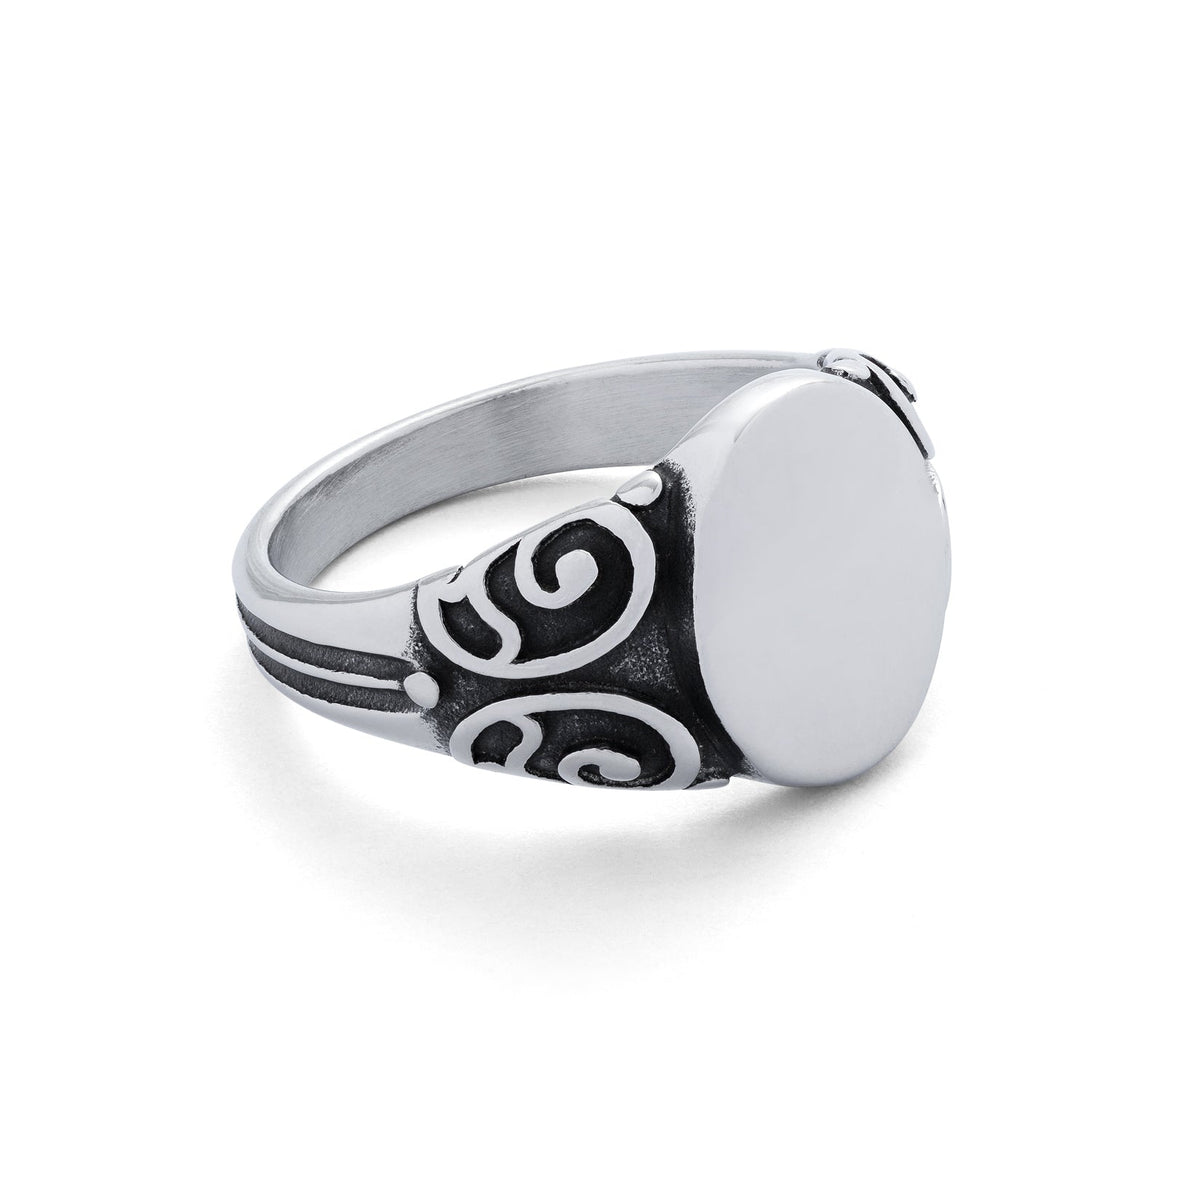 Scroll signet ring in silver by statement collective 2 